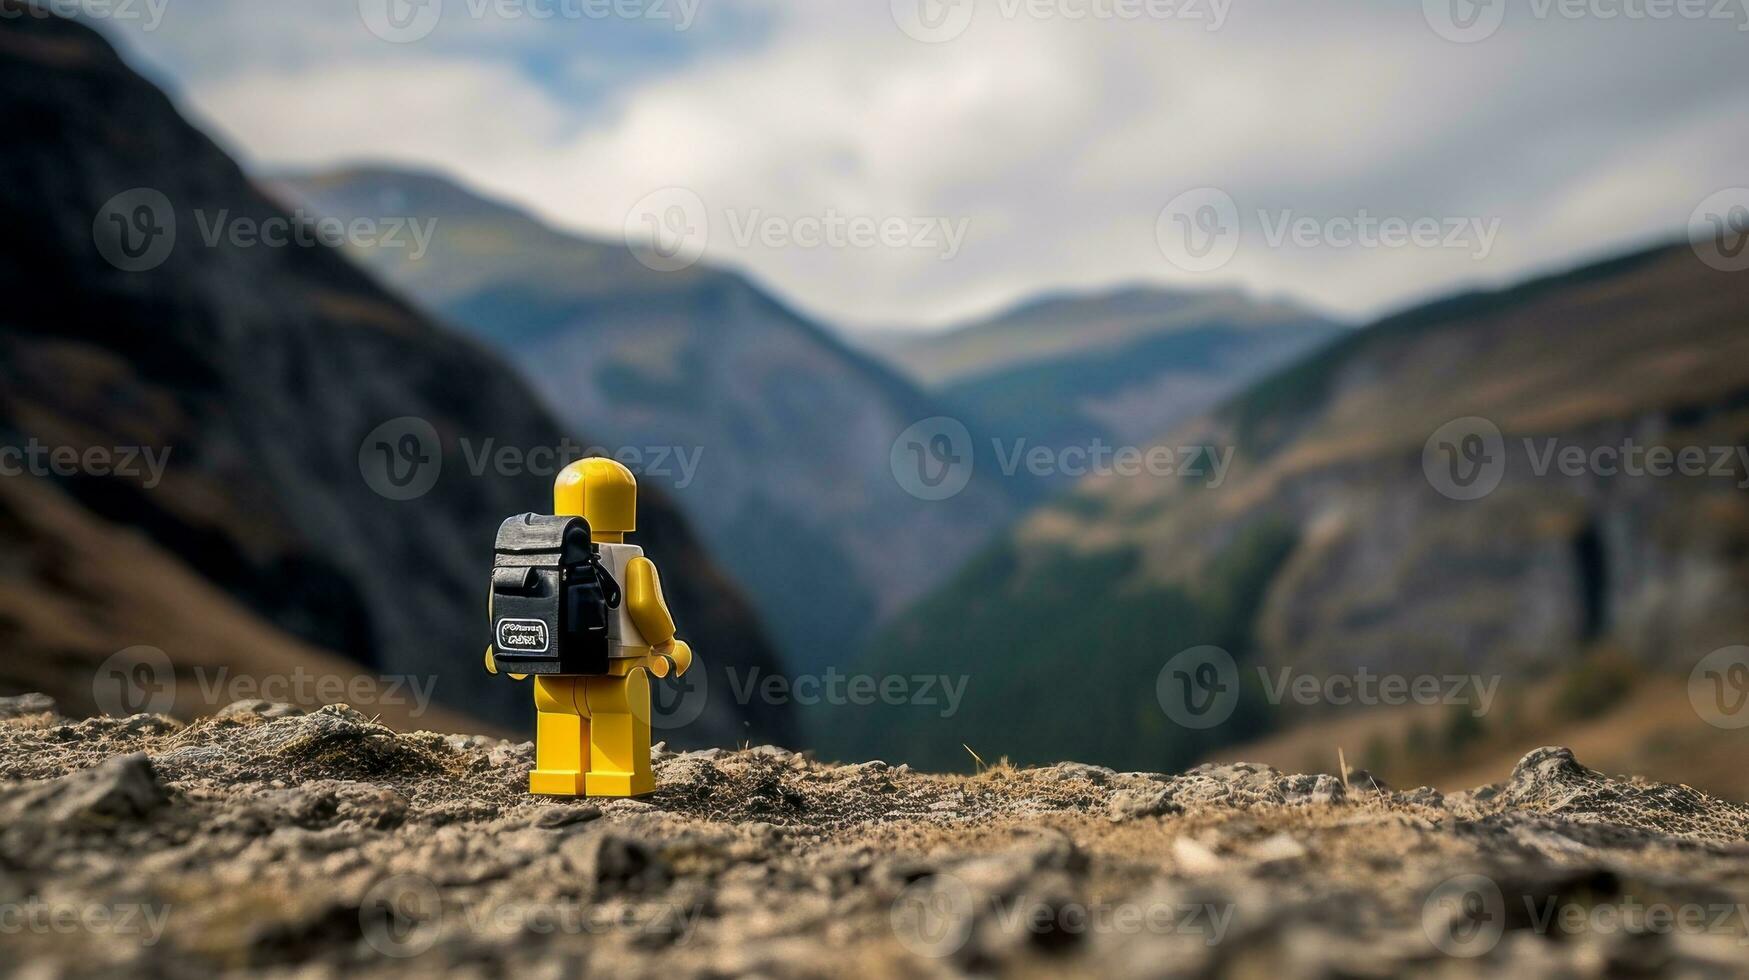 Lego character embarking on epic adventures with friends AI Generative photo